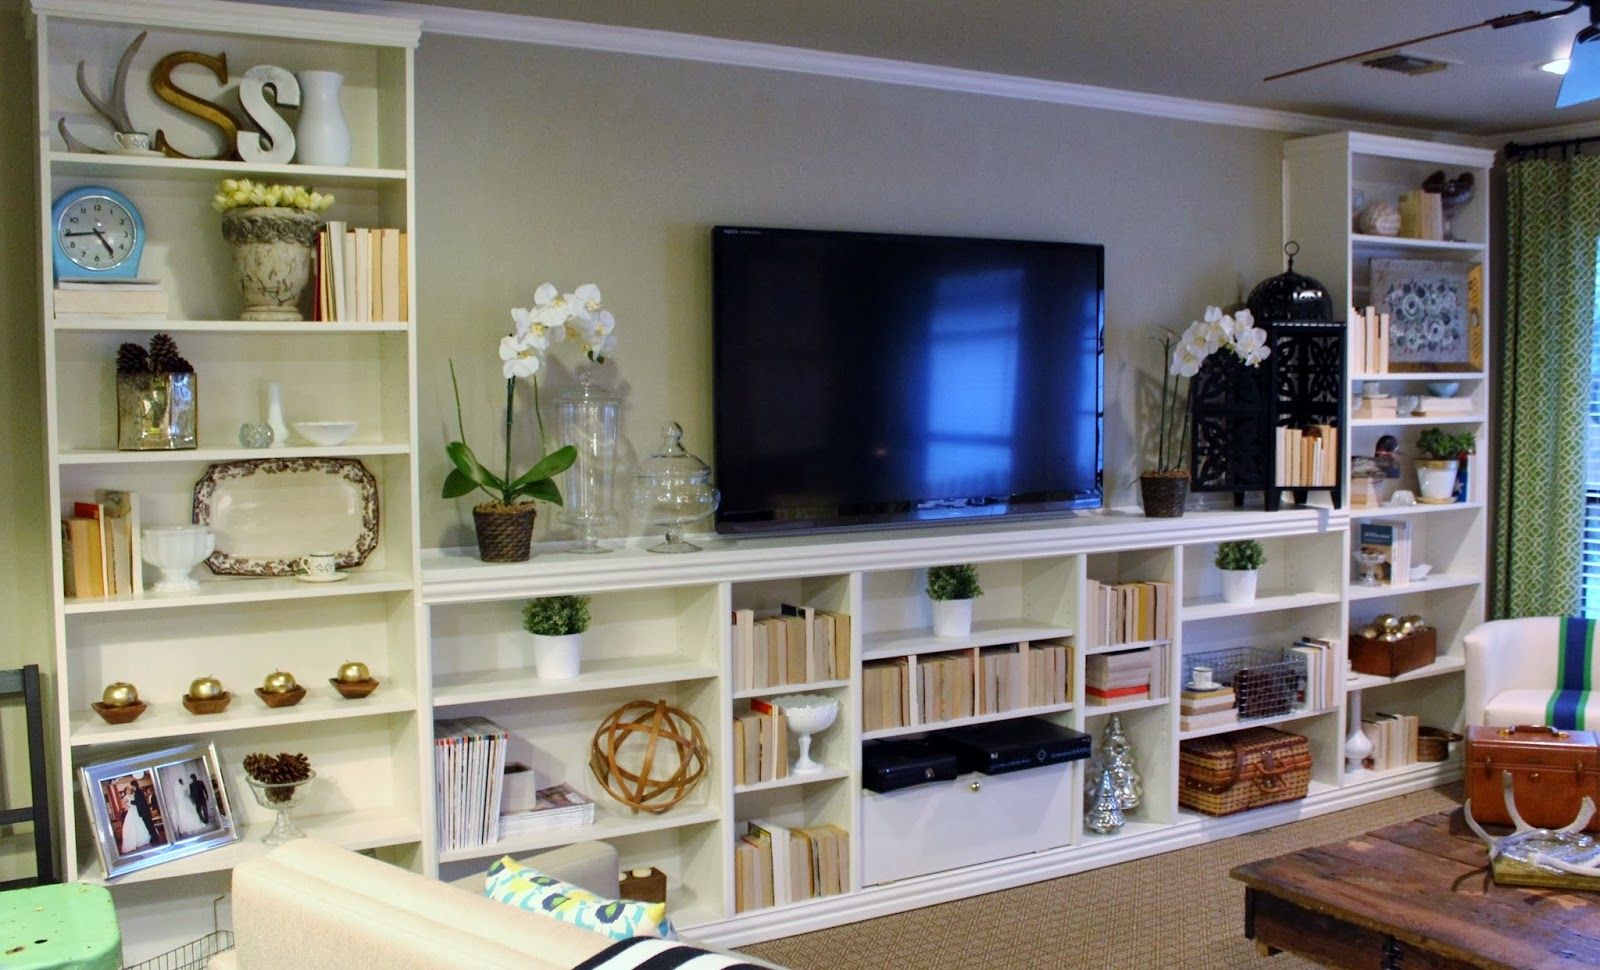 Elementary Organization Billy Bookcase Built In Bonanza Pertaining To Built In Bookcases With Tv (View 12 of 15)